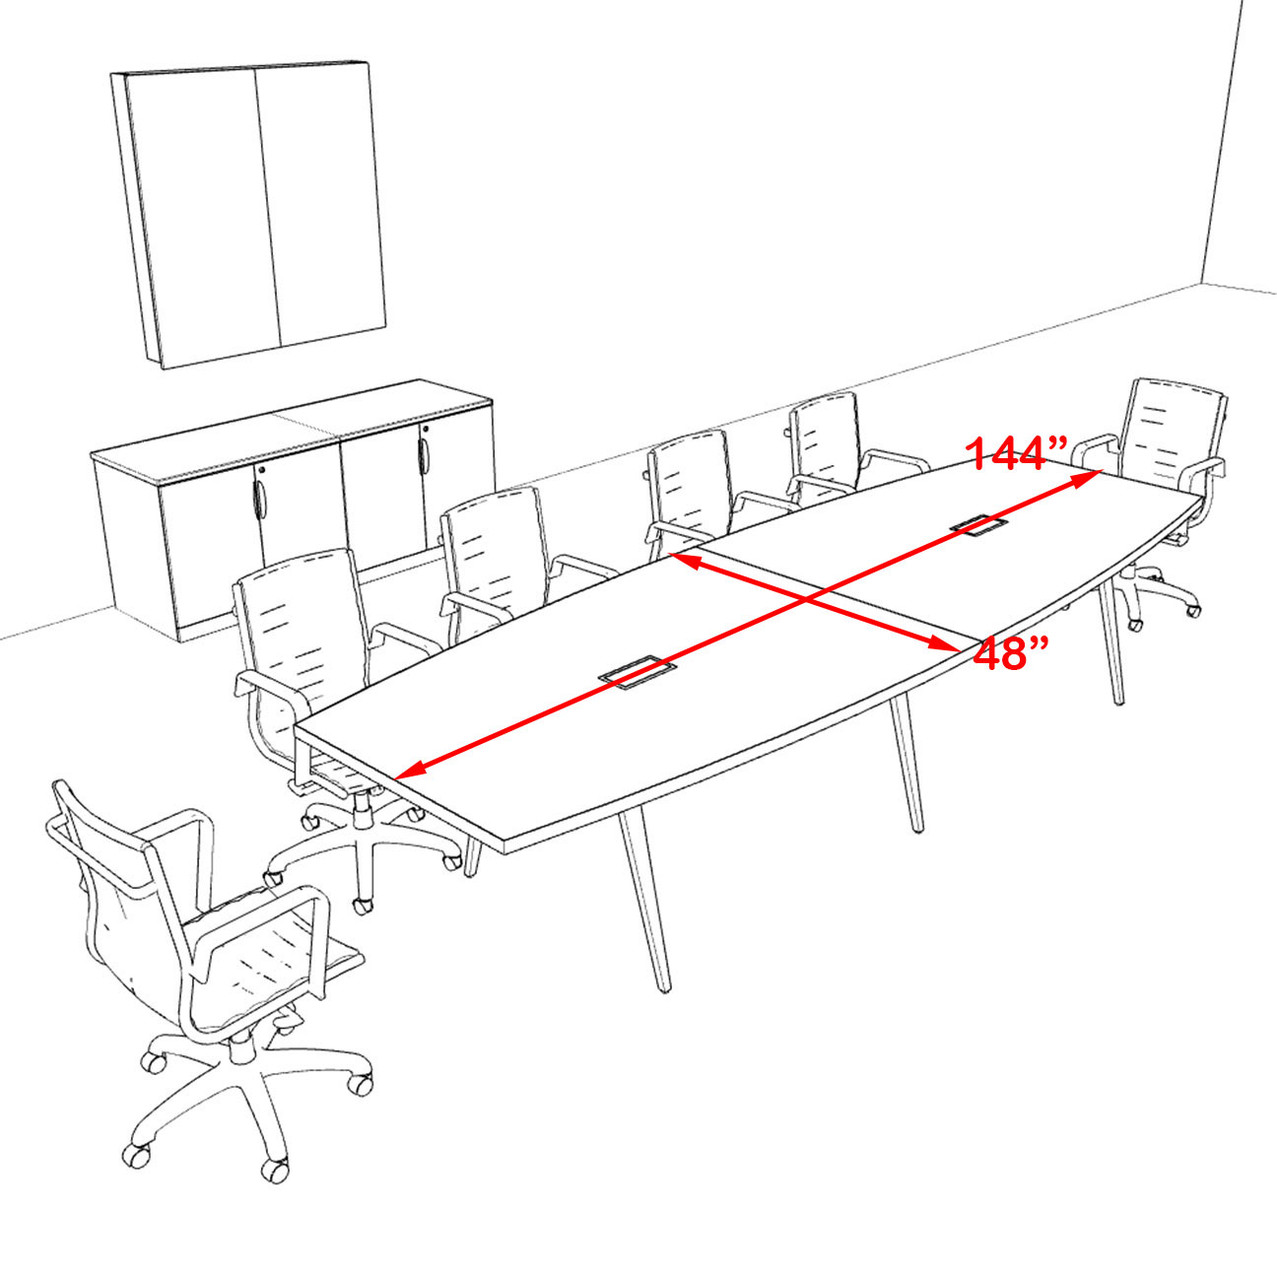 Modern Boat shaped 12' Feet Conference Table, #OF-CON-CW20